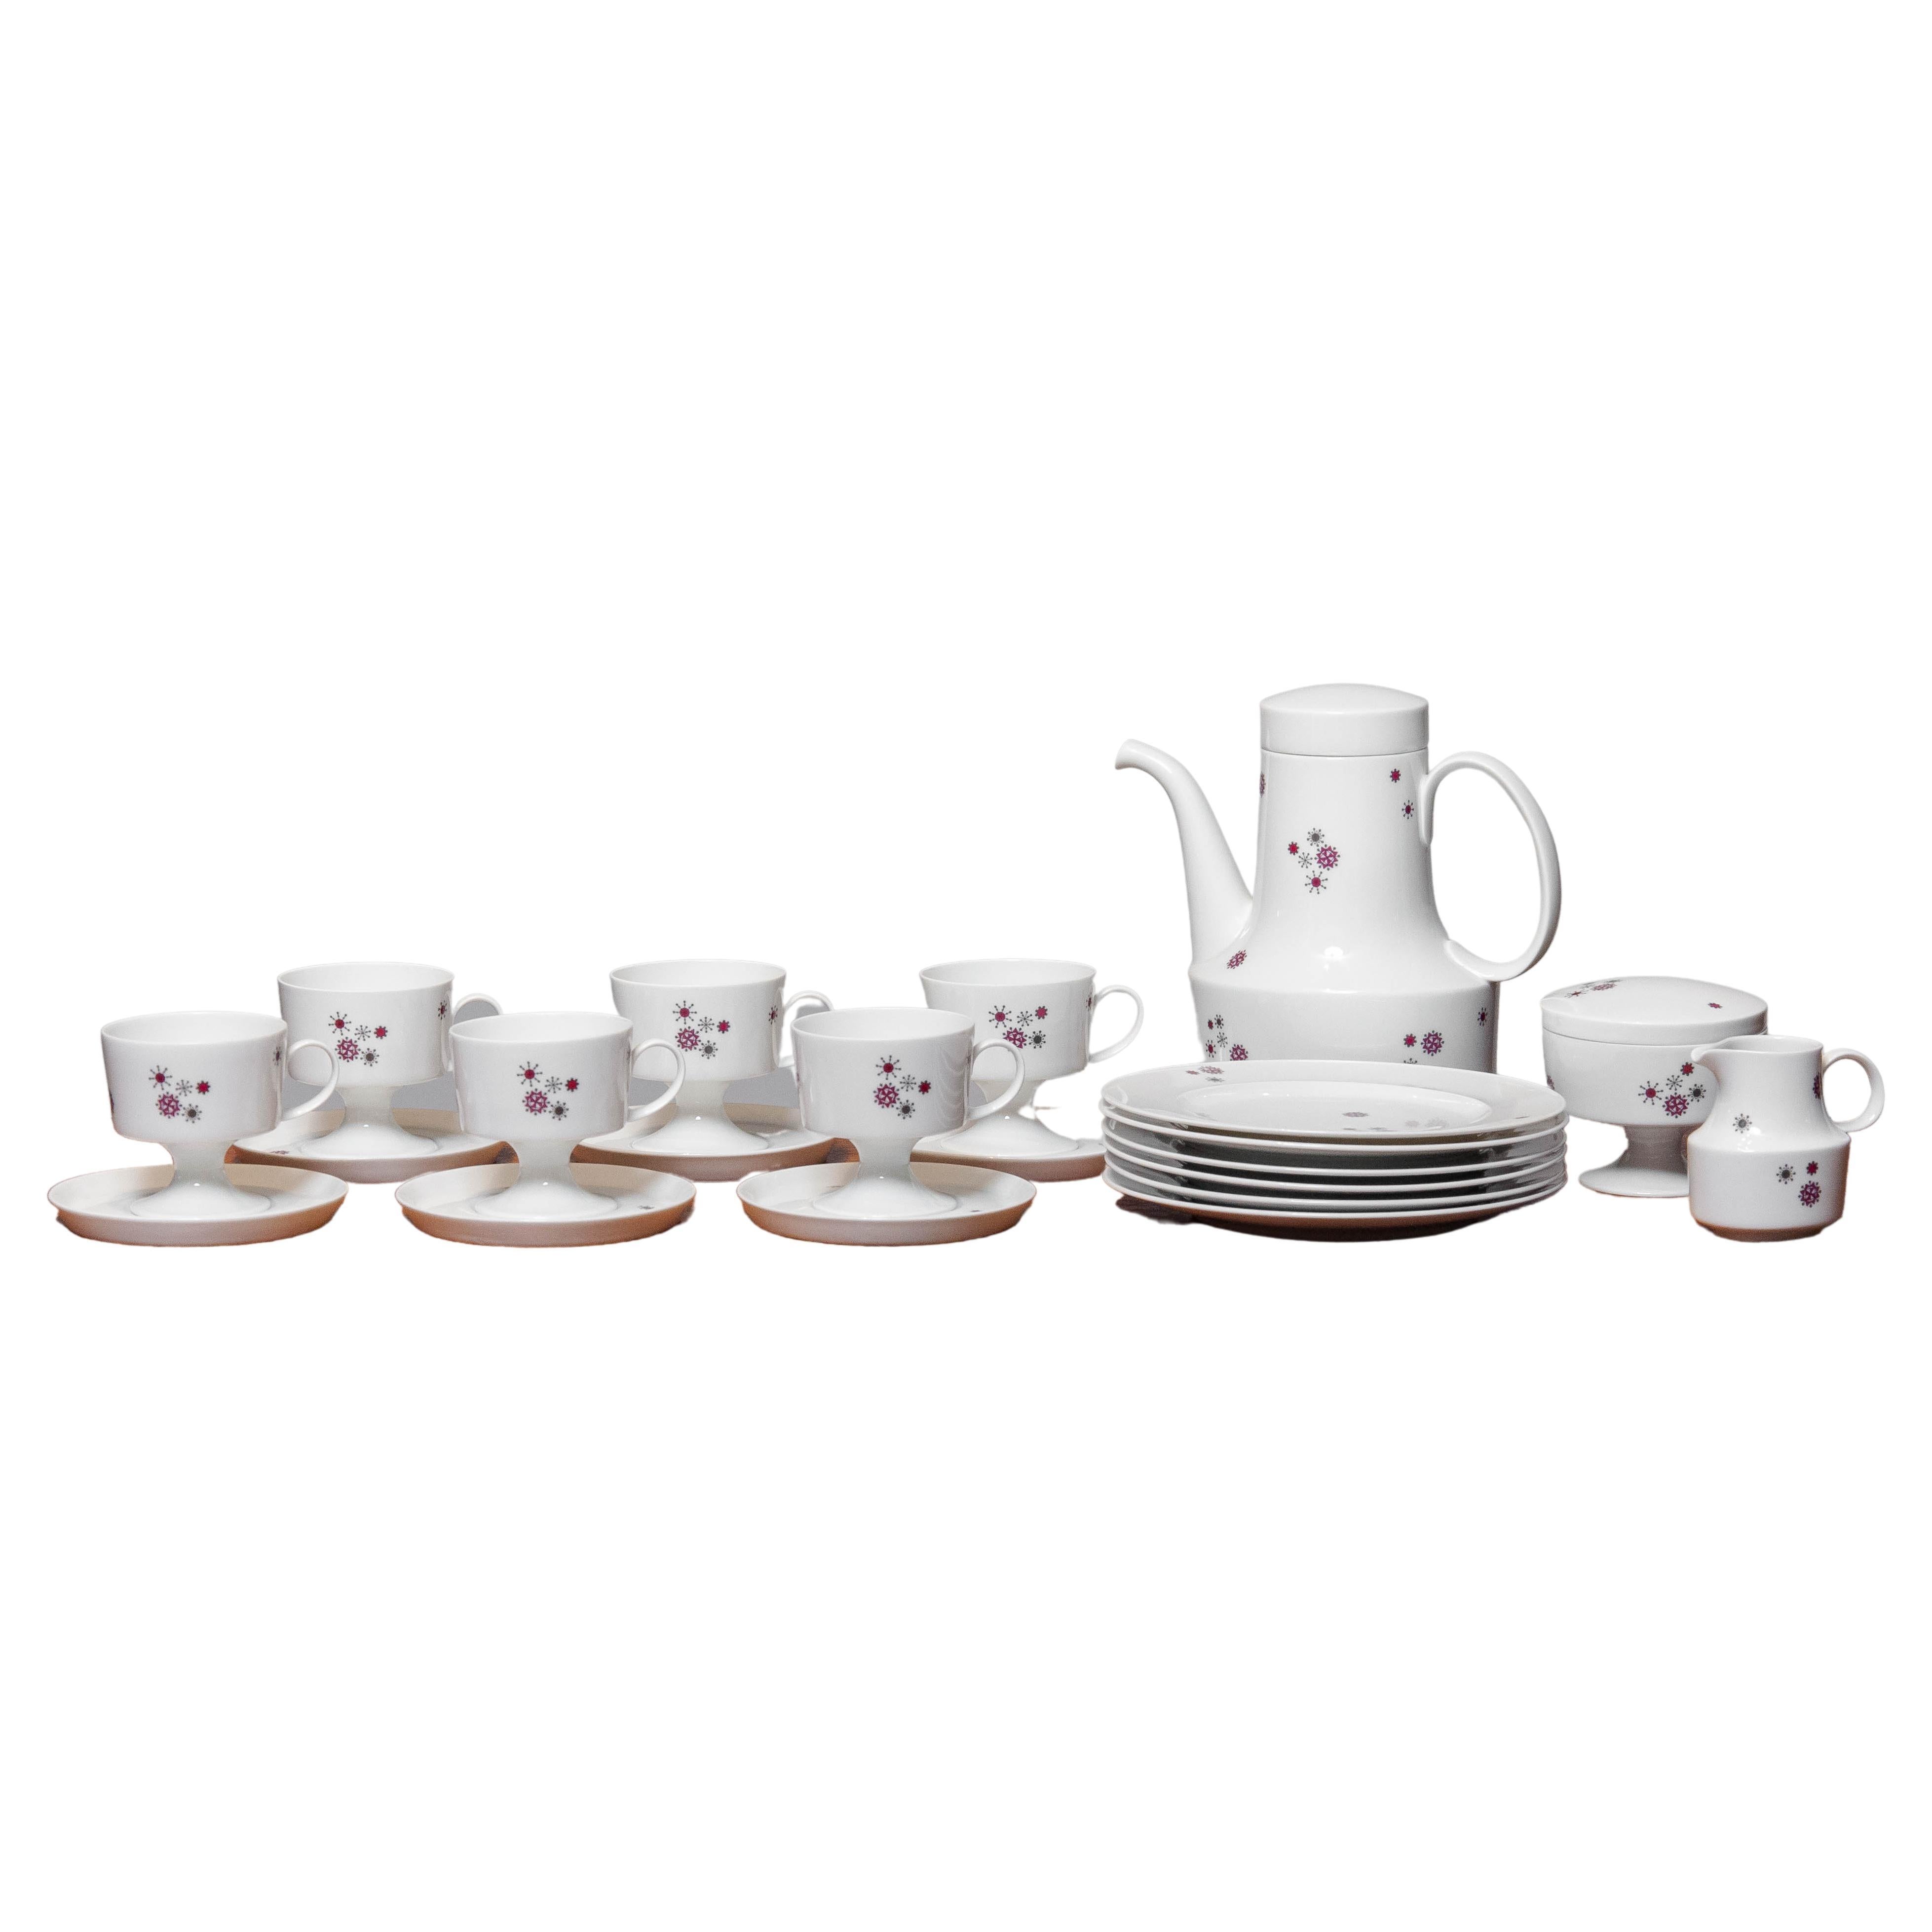 1960's Tea Set For Six Persons by Tapio Wirkkala And Ute Schröder For Rosenthal For Sale